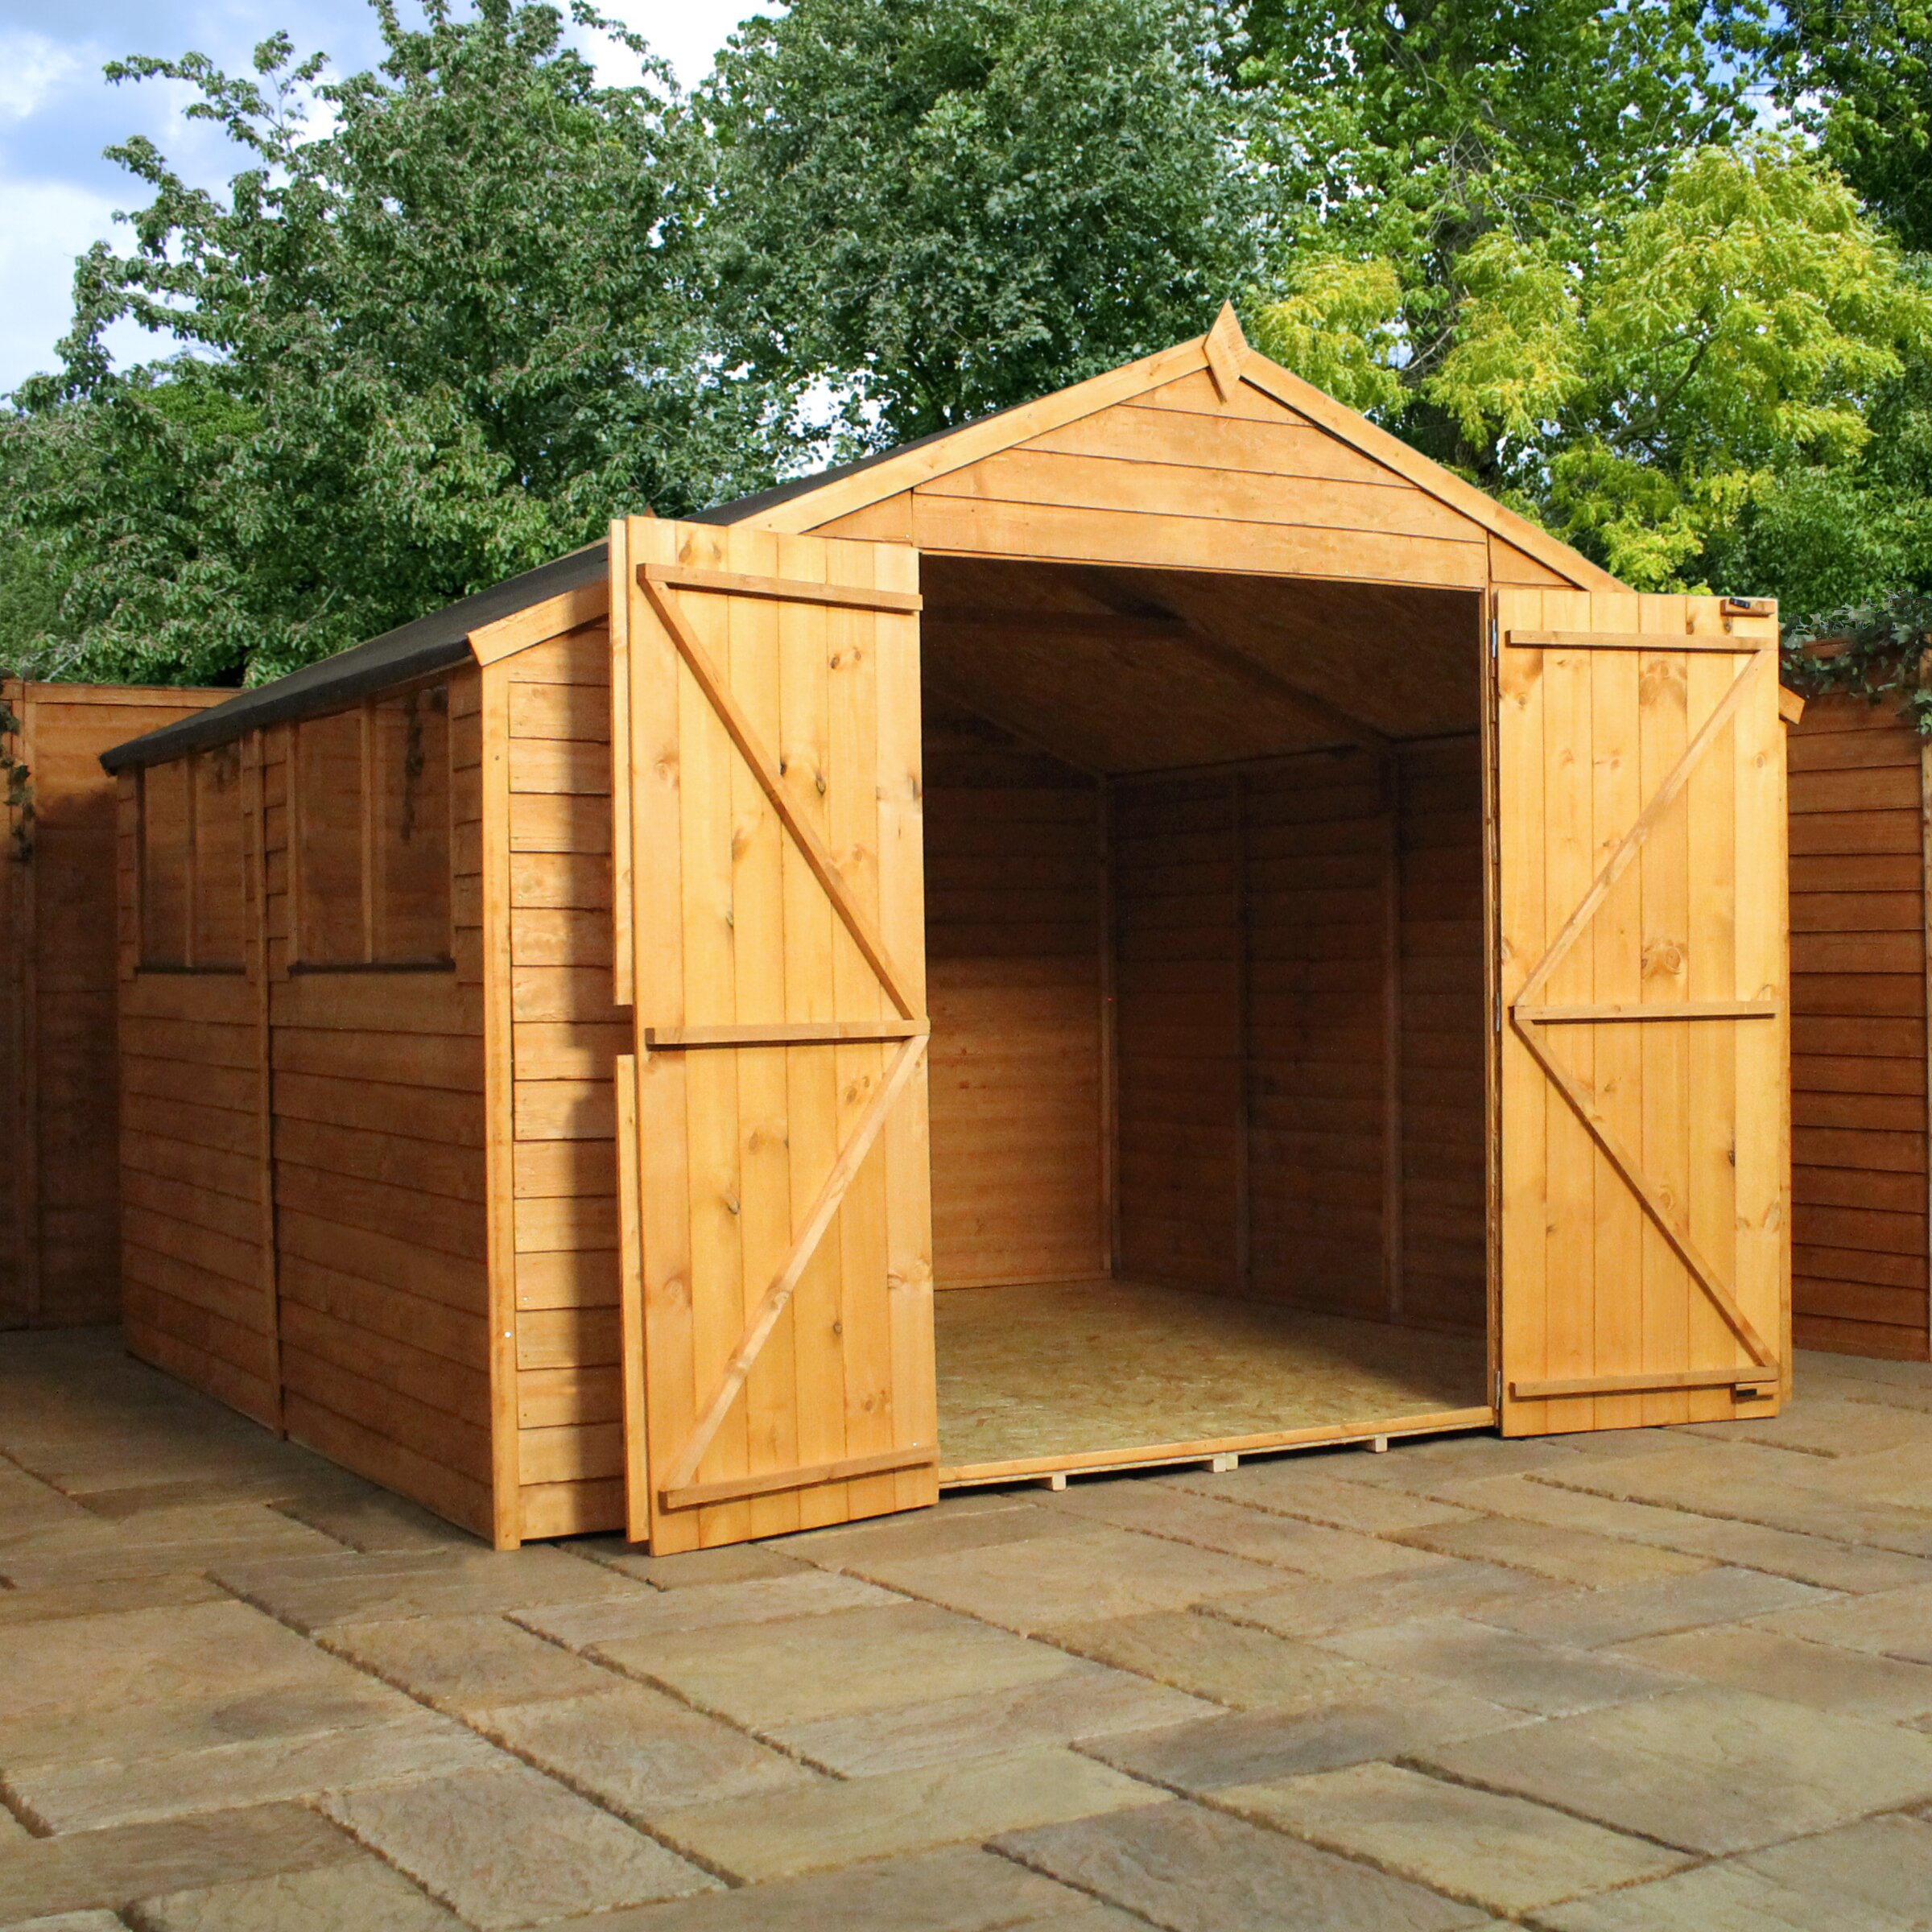 How to Insulate a Metal or Wooden Shed to Keep Pests Out